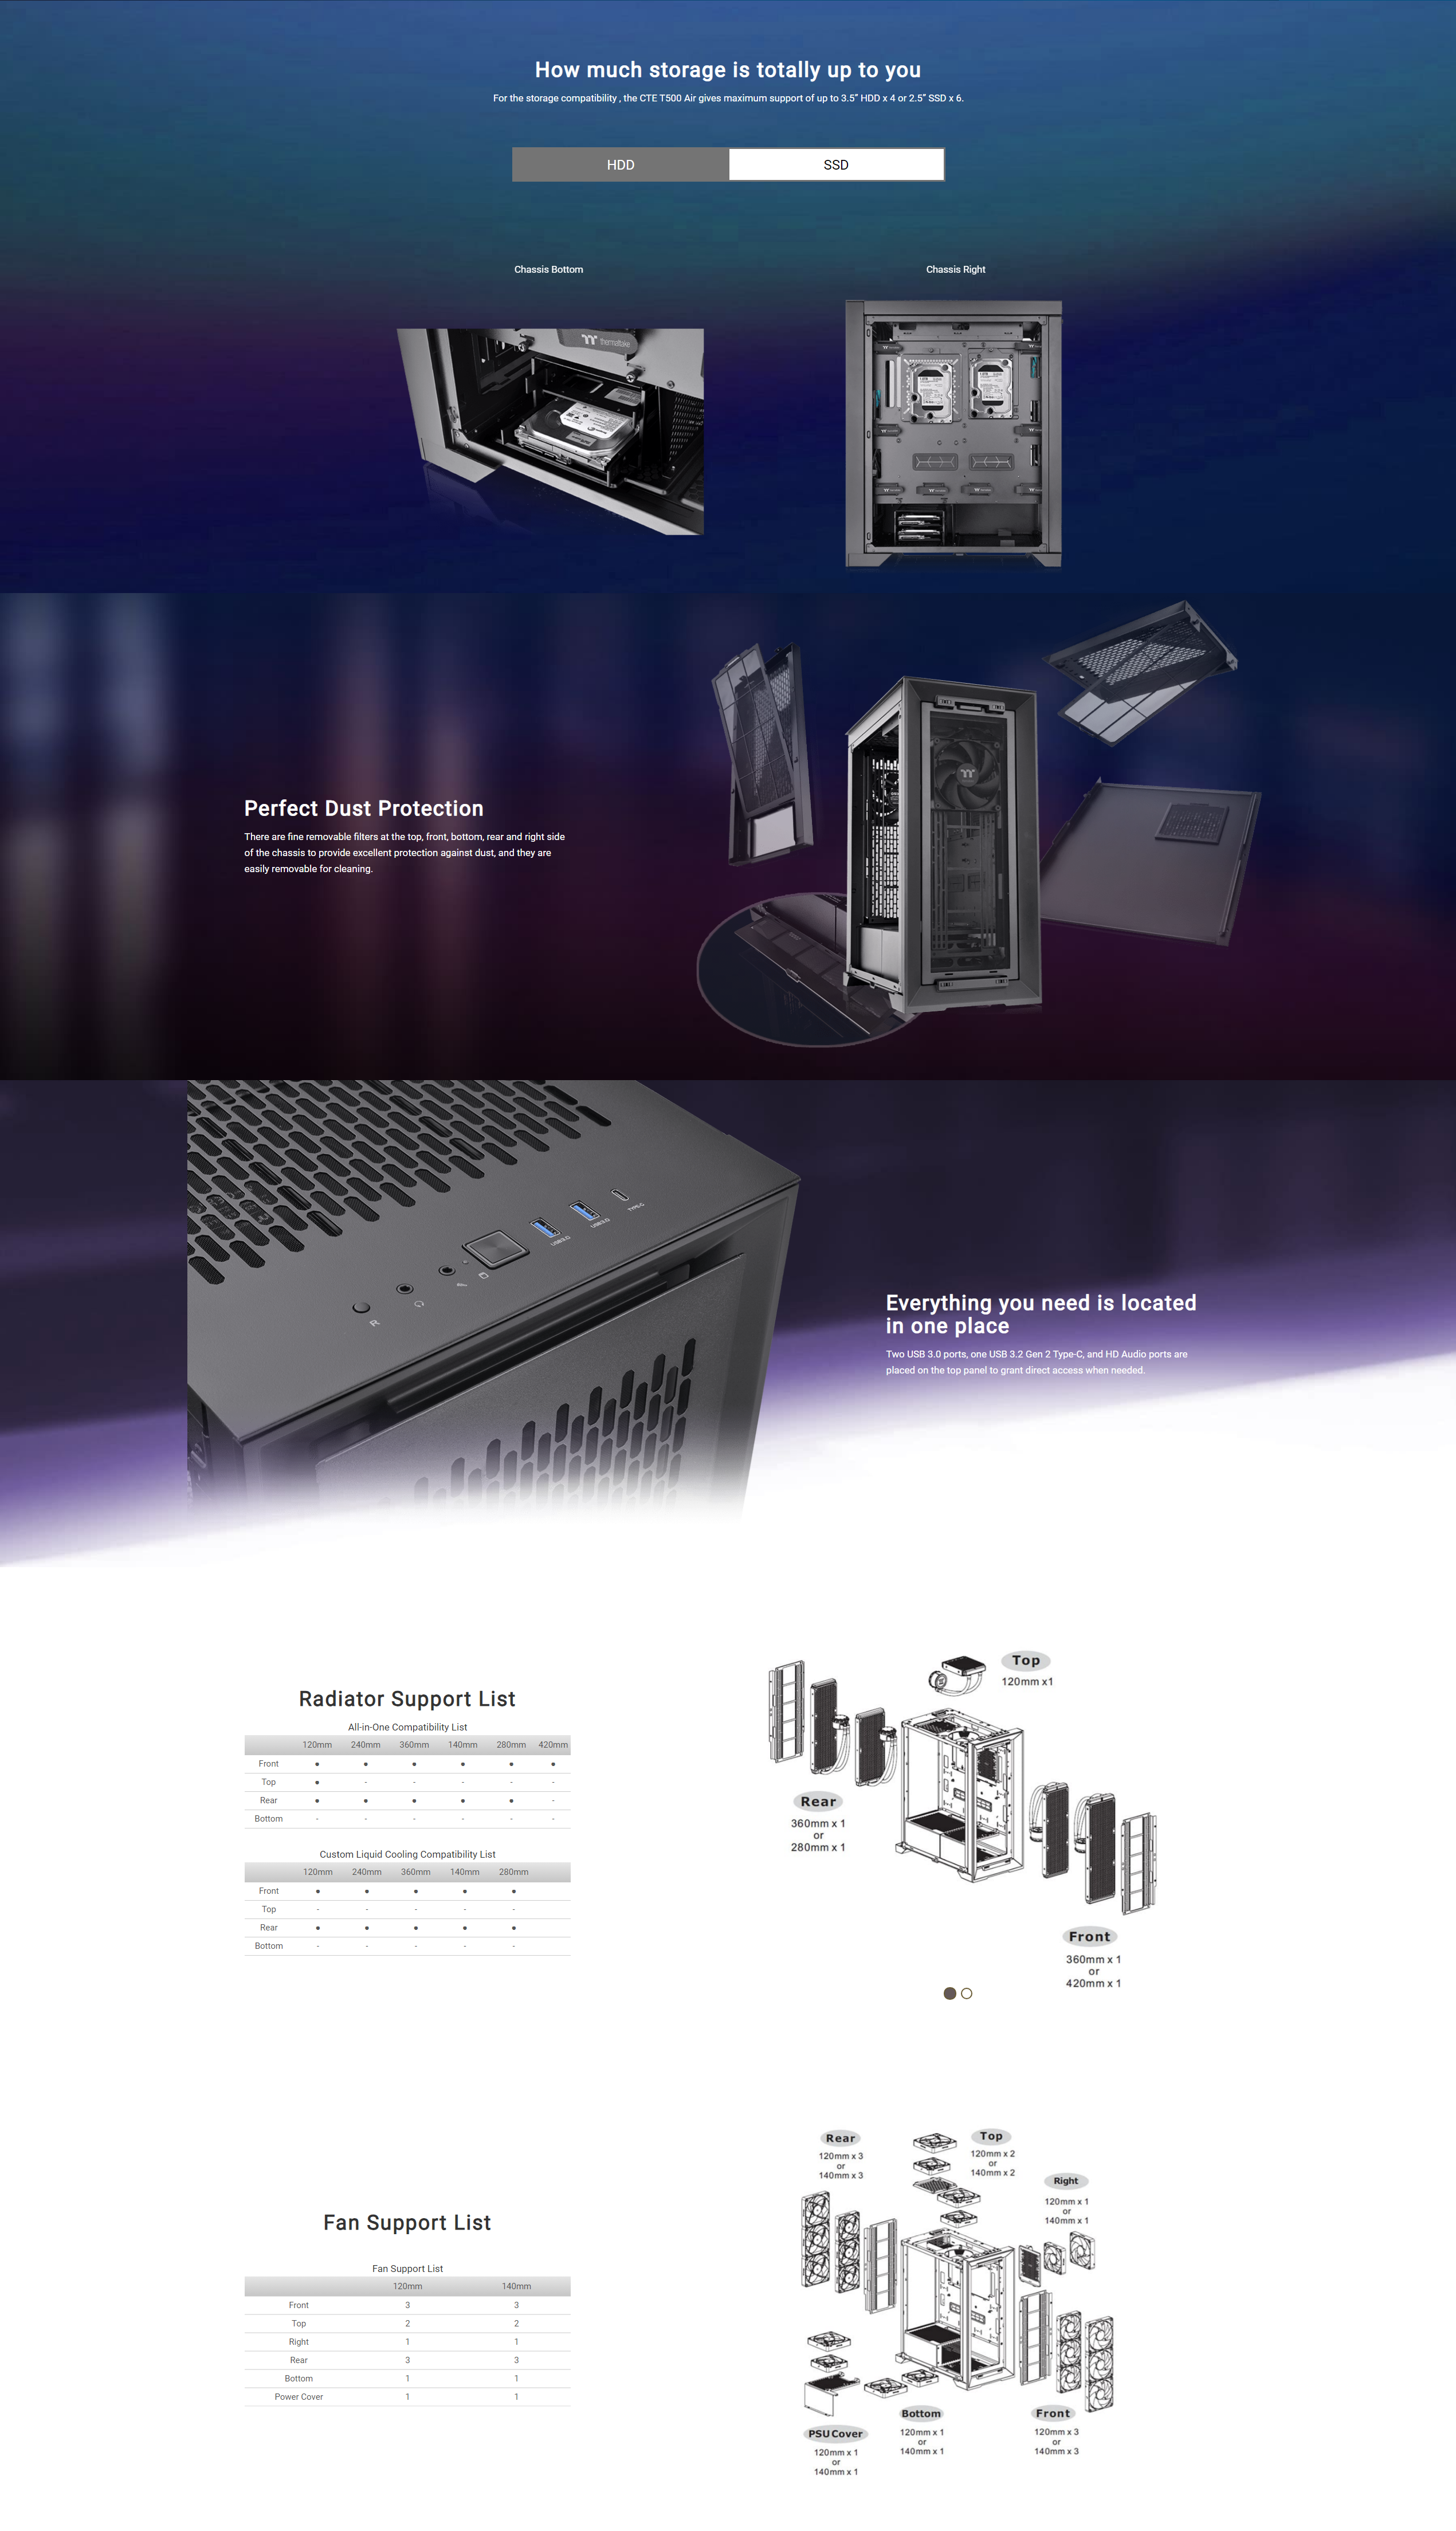 A large marketing image providing additional information about the product Thermaltake CTE T500 Air - Full Tower Case - Additional alt info not provided